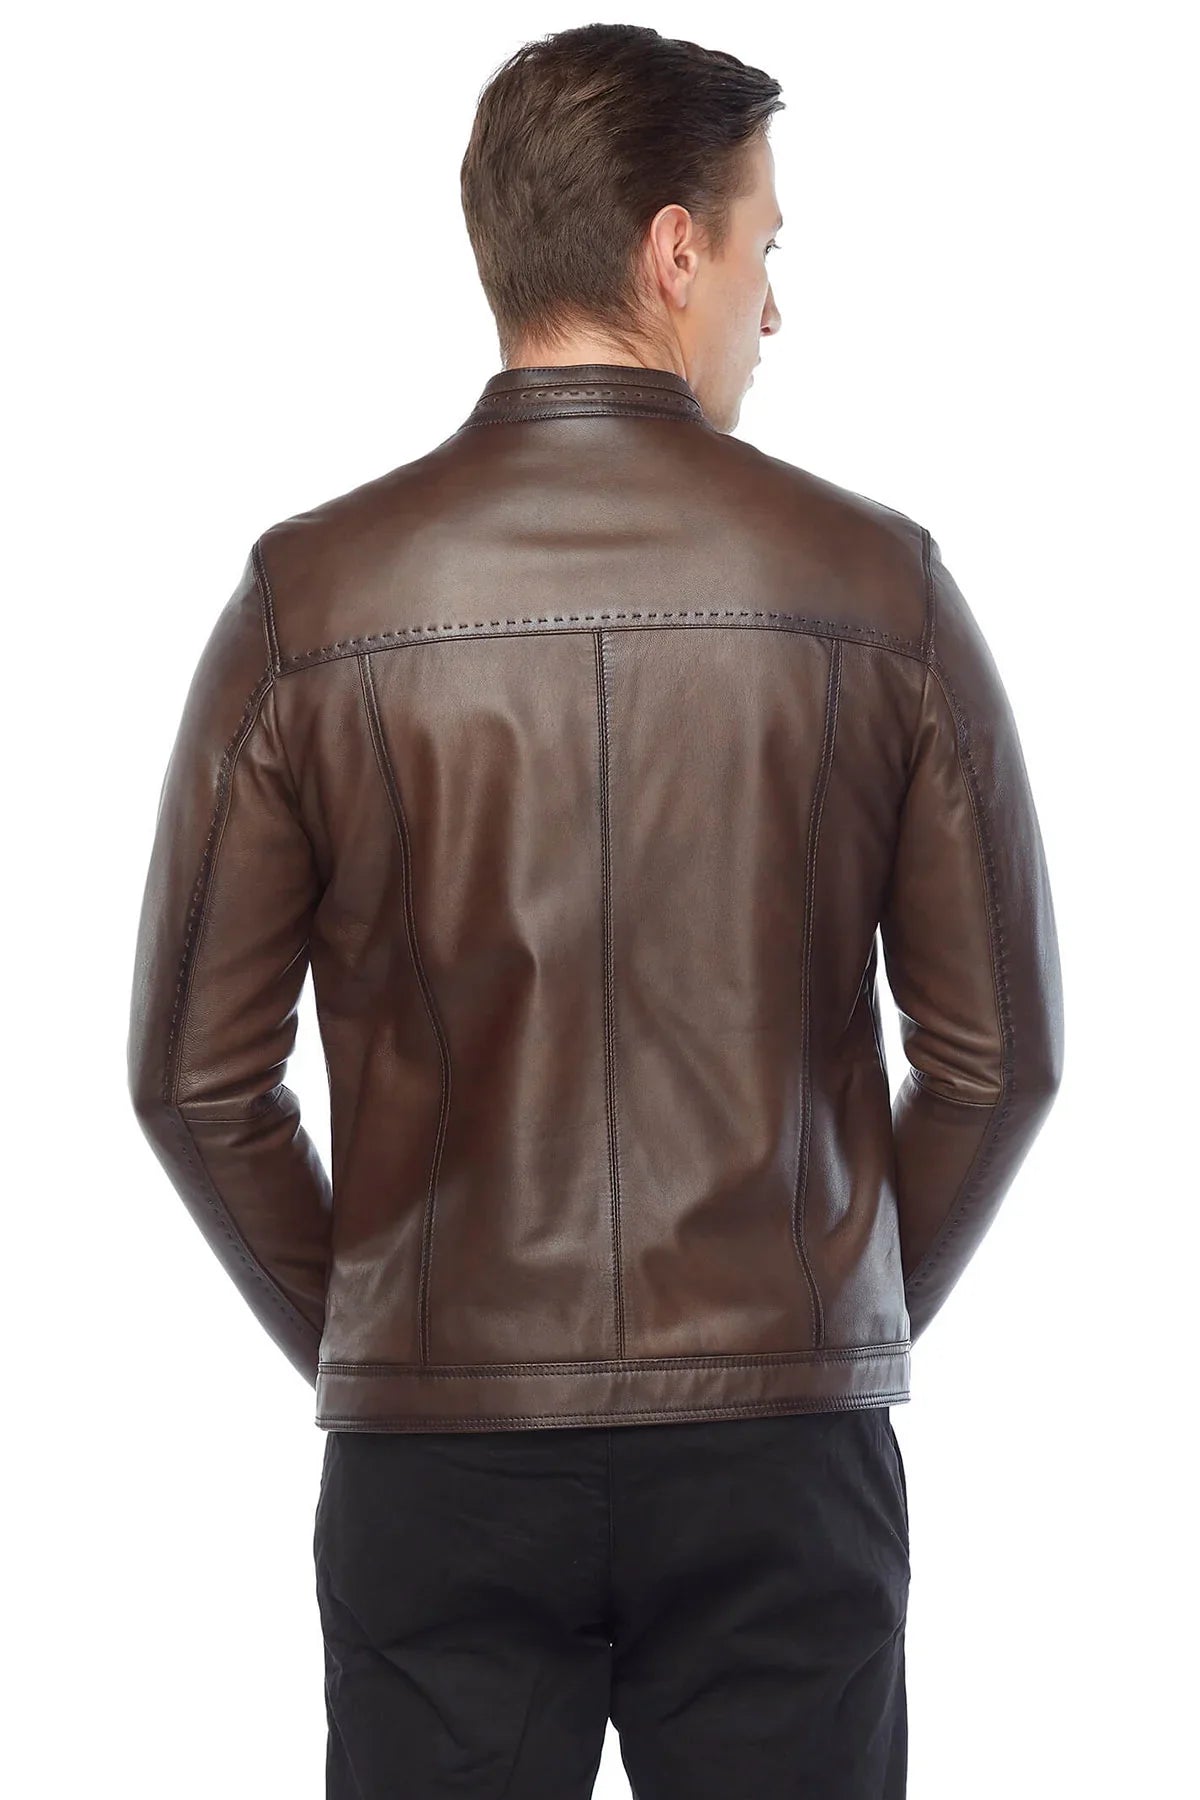 Sport Stitched Classic Real Leather Brown Jacket - LJ